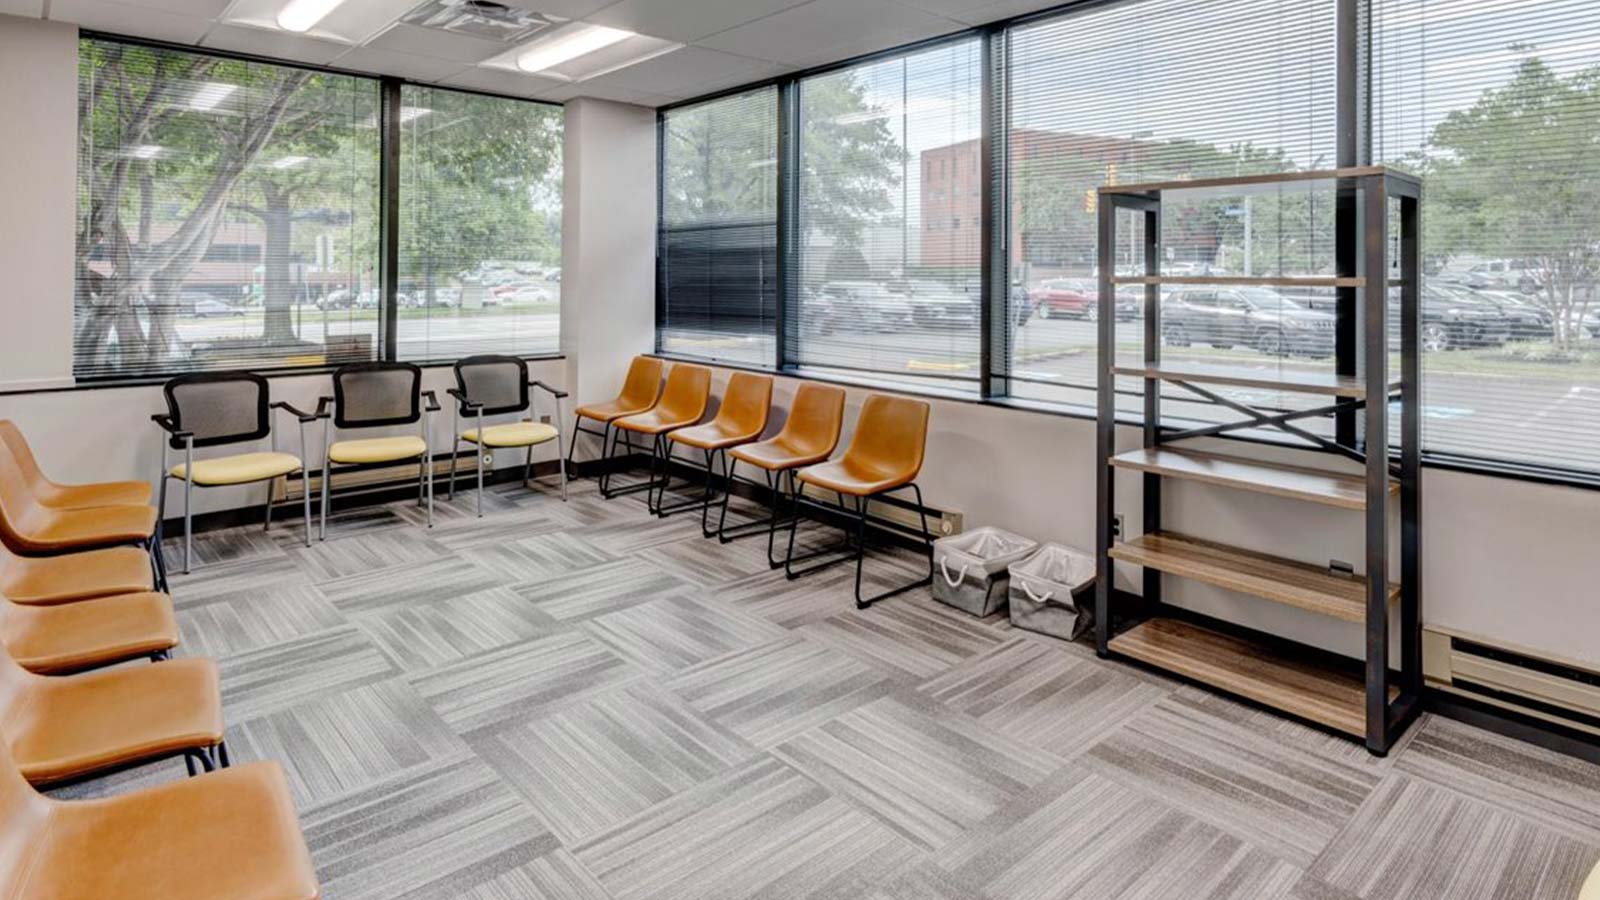 A group therapy room with a row of chairs facing large windows overlooking a parking lot.